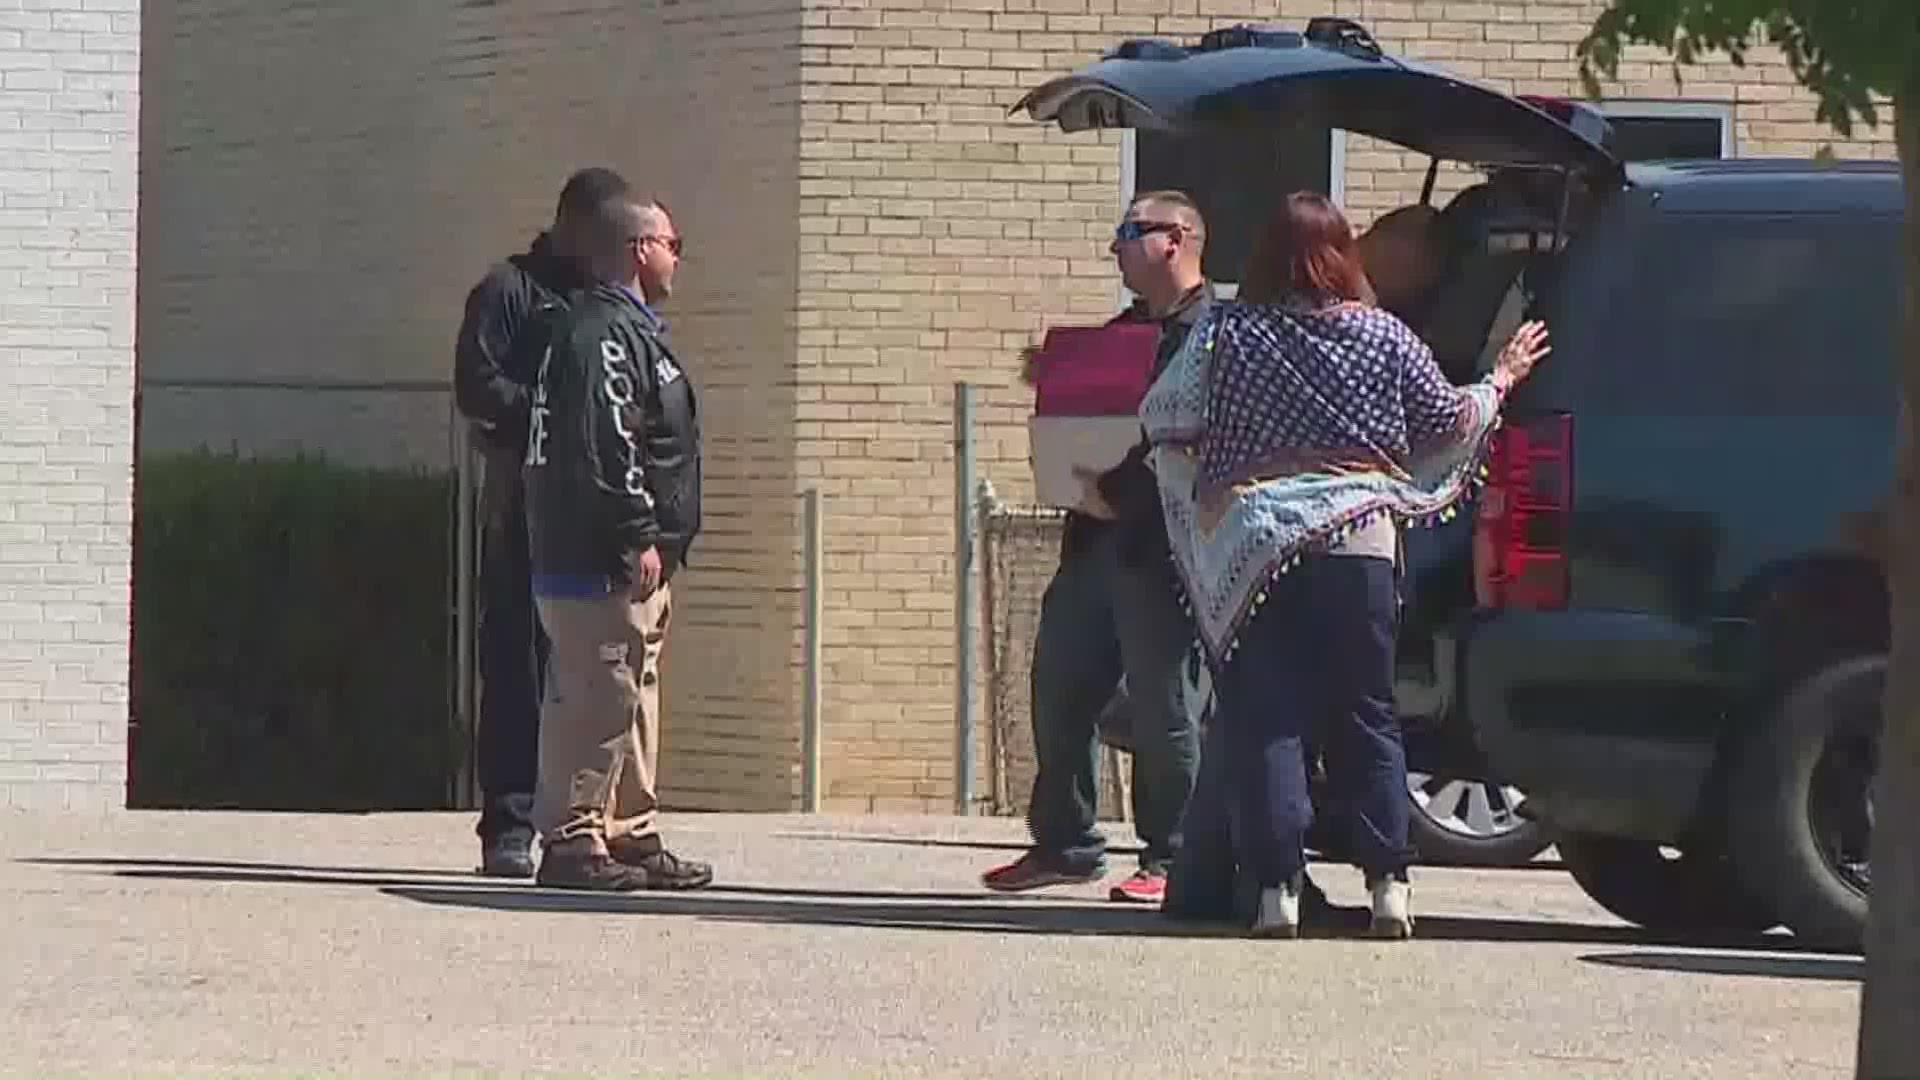 RAW VIDEO: Officers load box from St. Cecilia Church during search at Catholic Diocese of Dallas